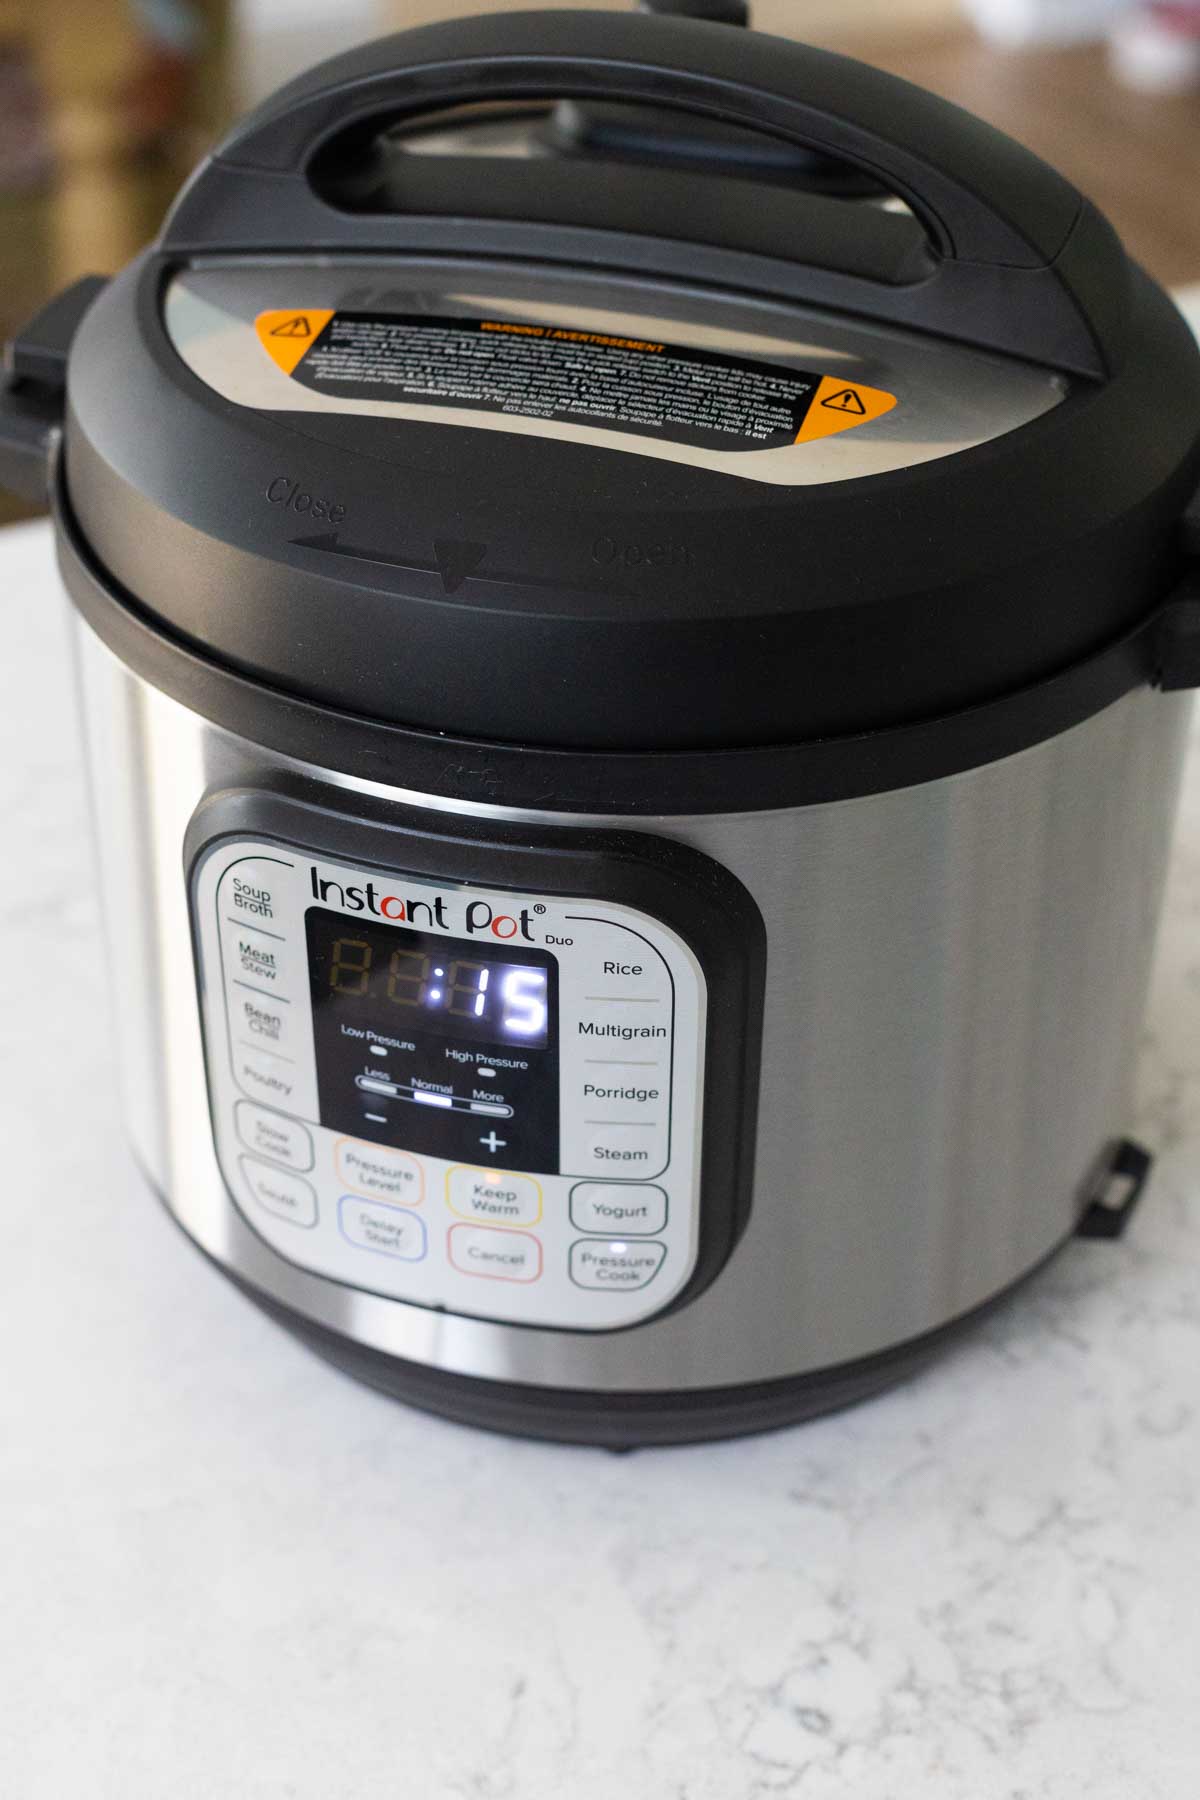 The instant pot is on the counter with the soup inside. The timer reads "15 minutes"